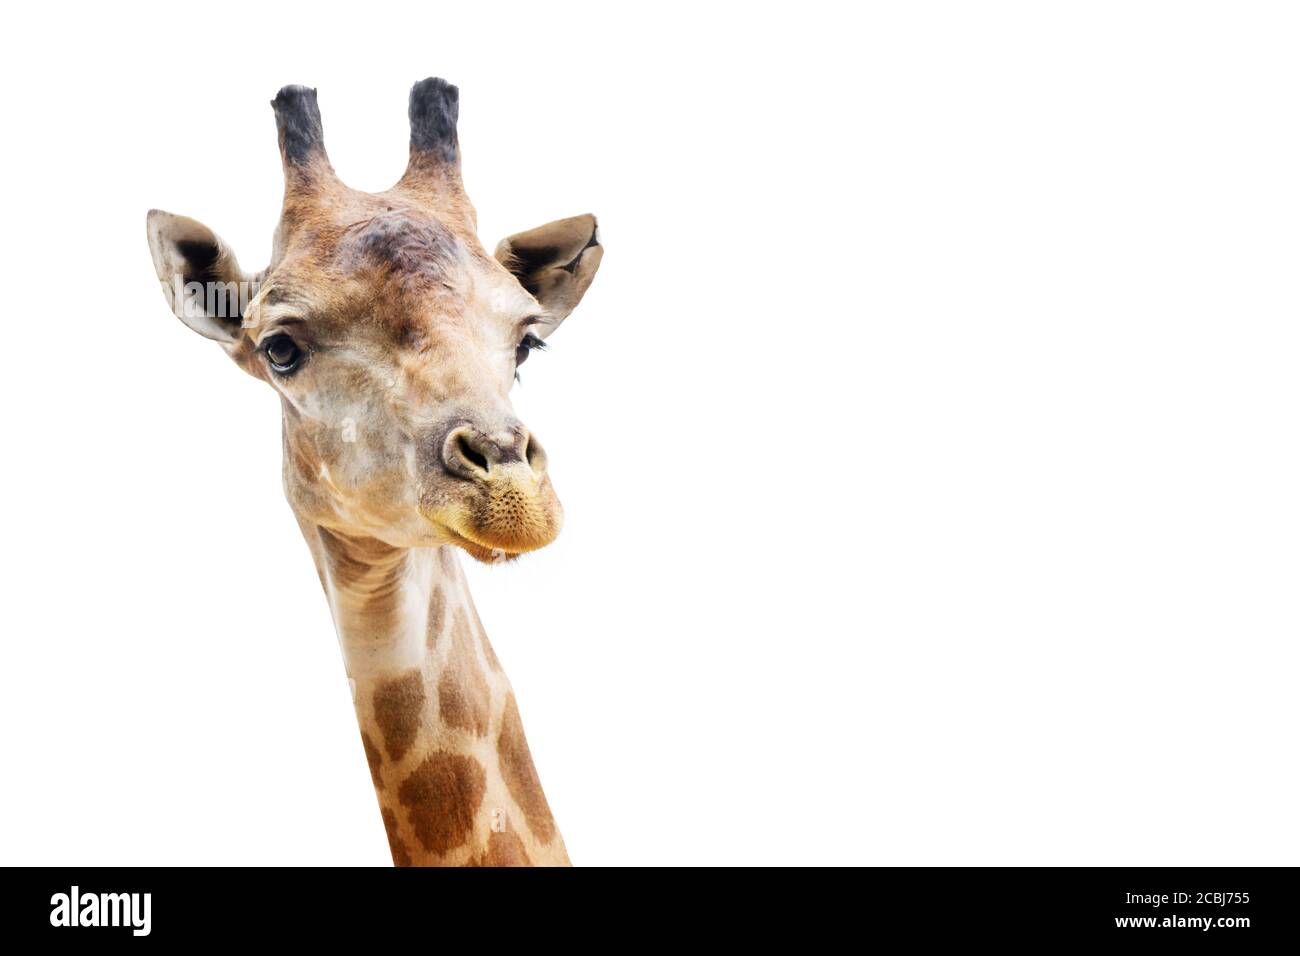 Close up shot of giraffe head isolate on white background with clipping path Stock Photo